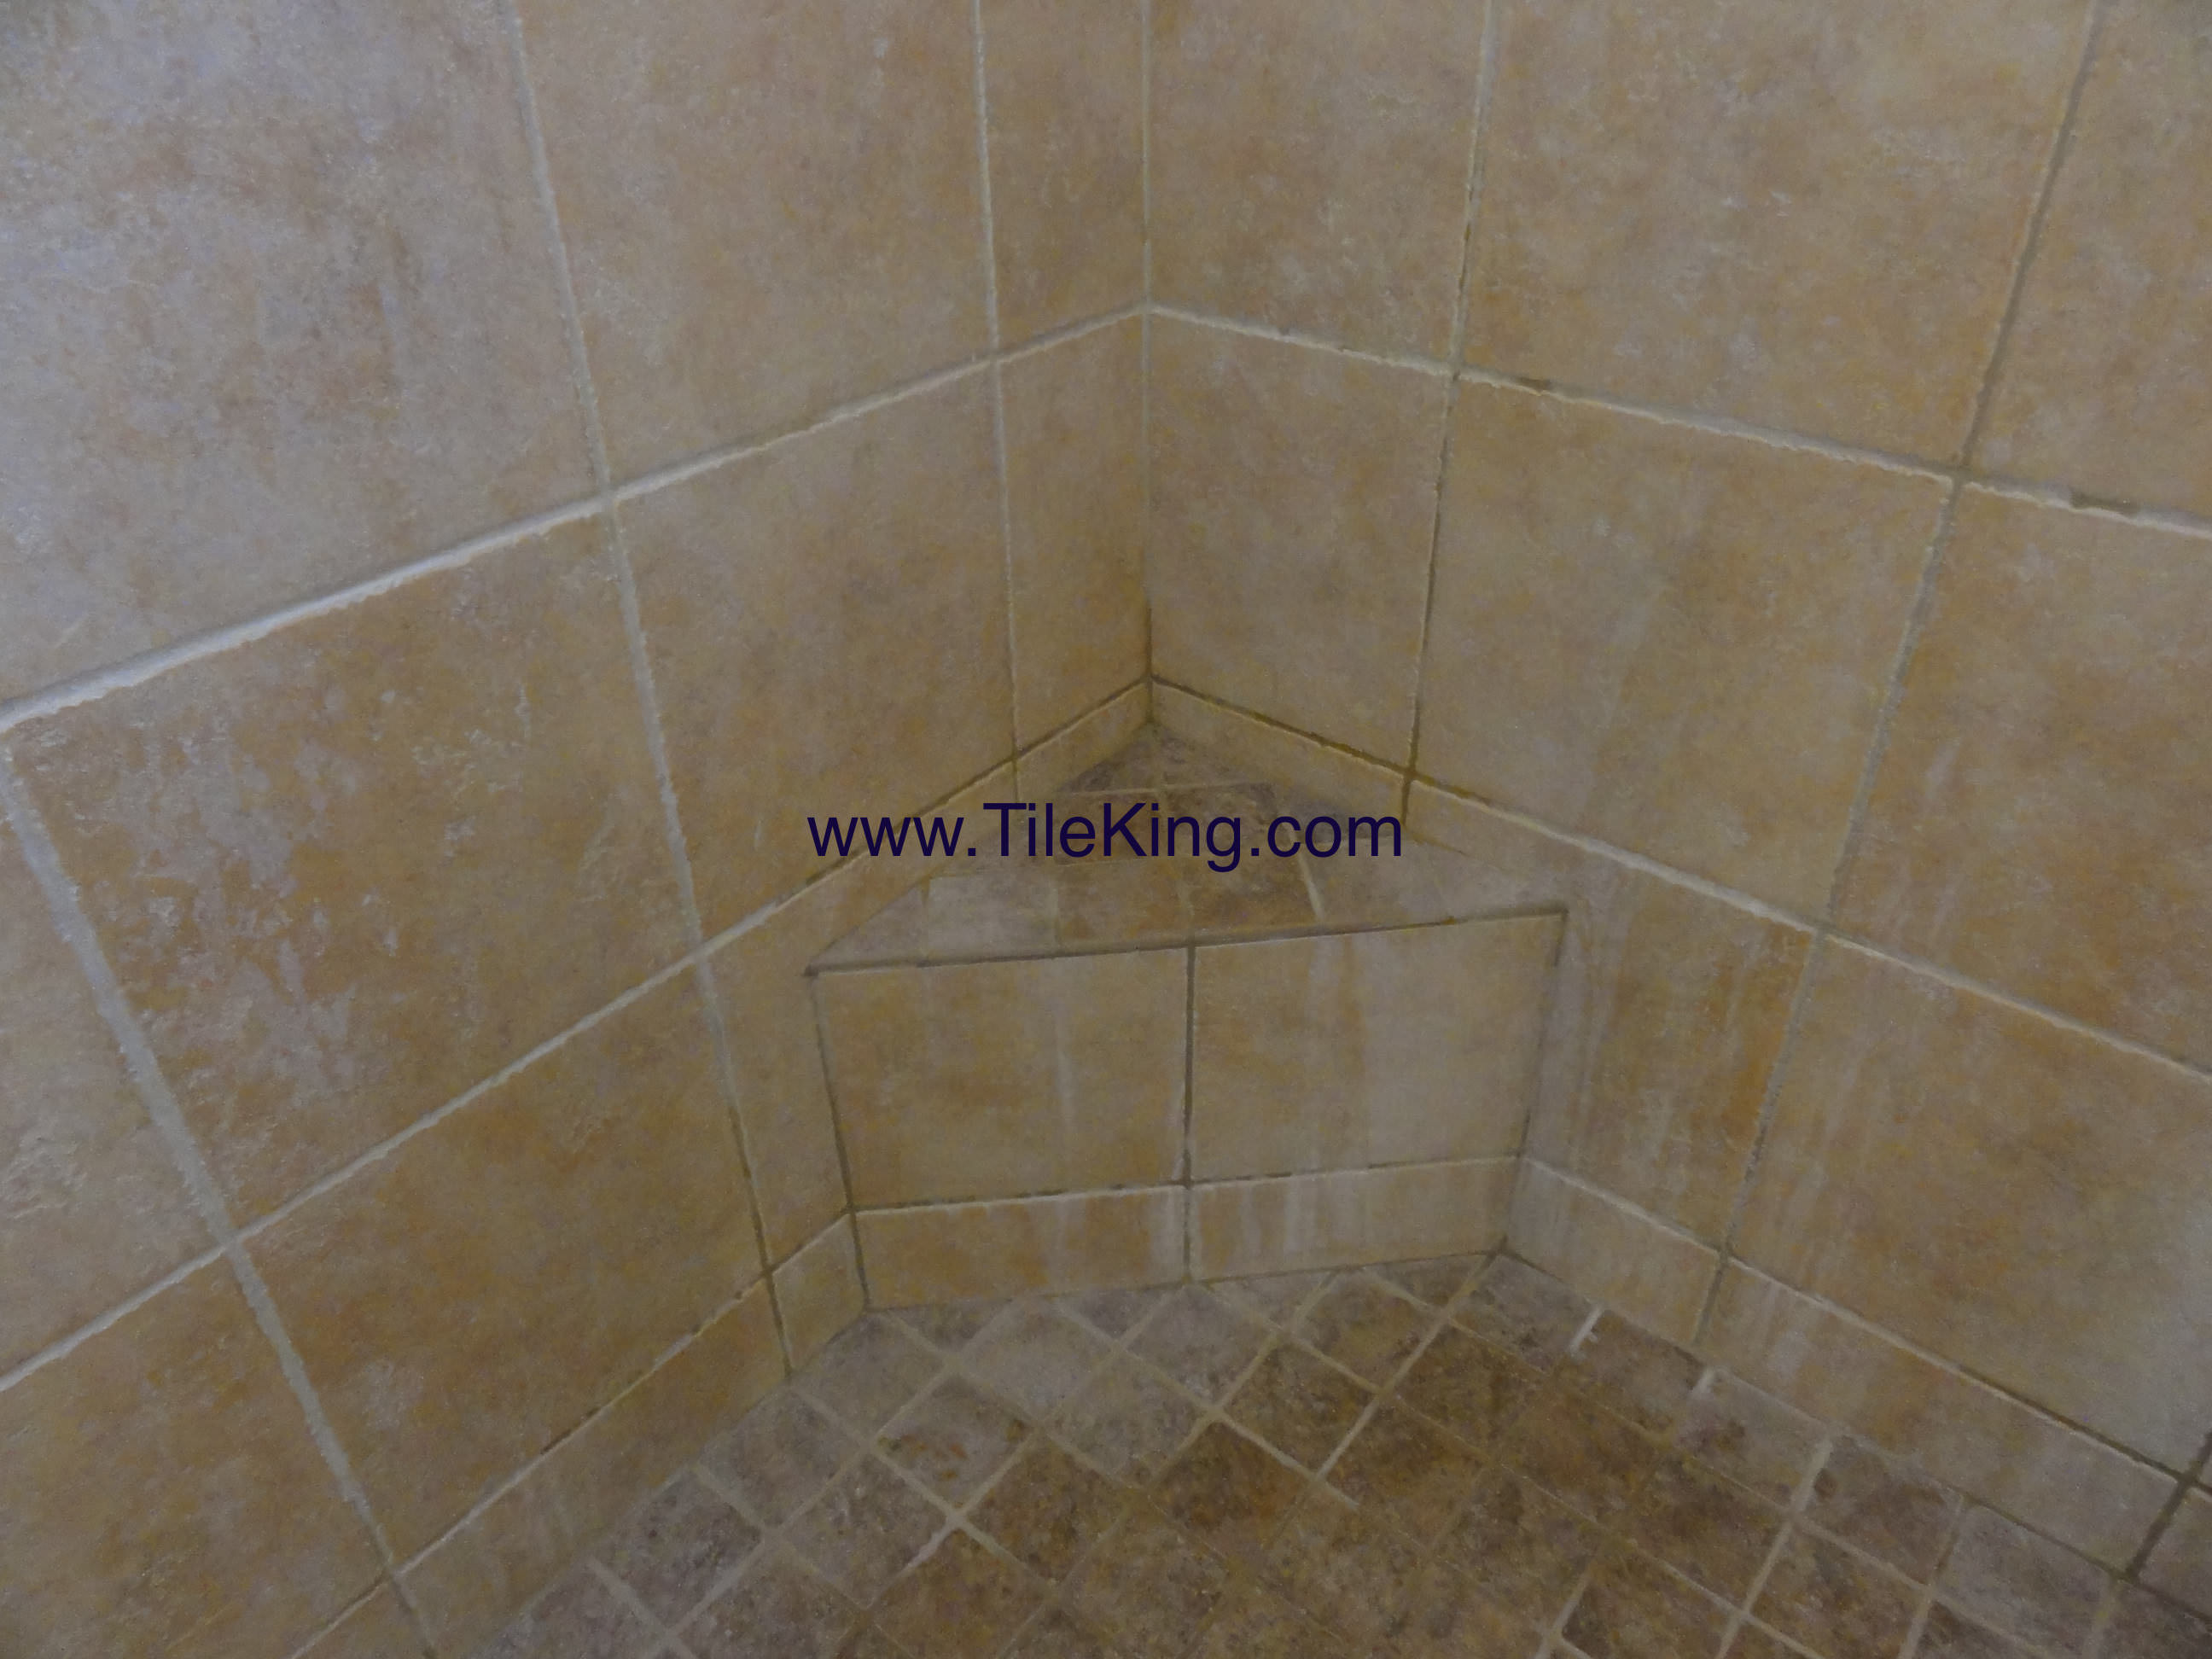 Travertine Shower Before Cleaning & Sealing